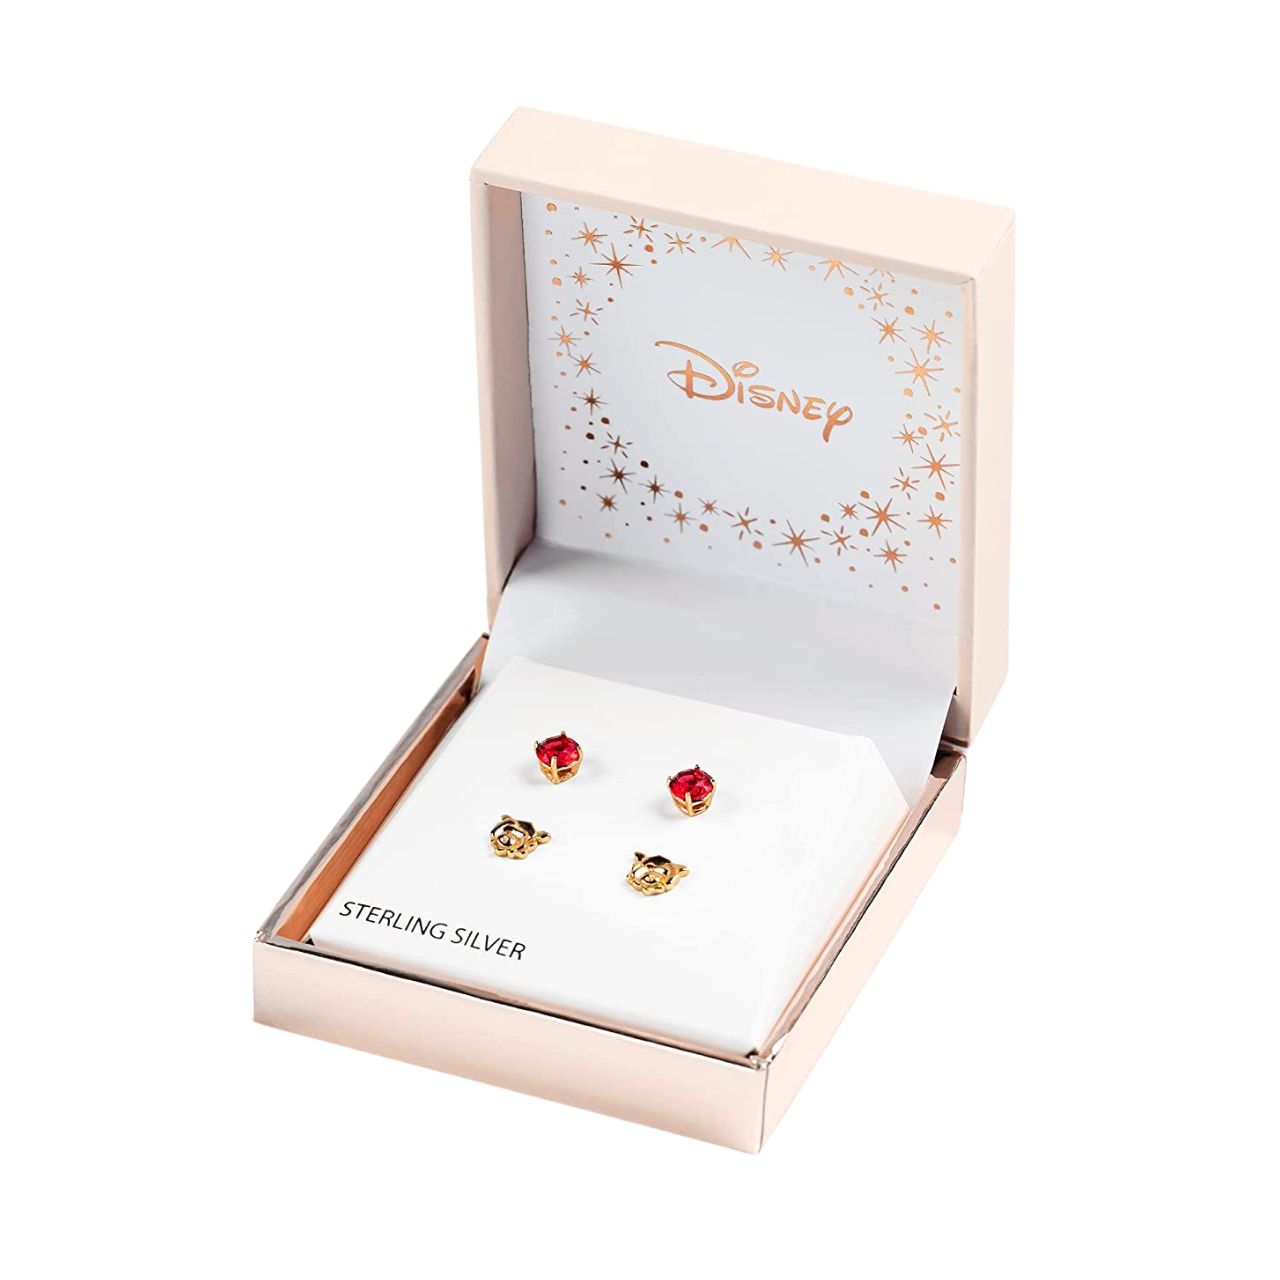 Disney Beauty And The Beast Sterling Silver Rose Gold Plated Red Stone Stud Earrings  Disney Beauty and the Beast Princess Collection, these beautiful gold plated rose studs and a pair of red stone studs Princess earrings adding a feminine touch to the Disney classic piece of Jewellery.  Trendy and fashionable design, the Disney Princess collection, sterling silver earrings add a chic, fun touch to any outfit. Official Disney Beauty and the Beast earrings are the perfect gift for any Disney princess fan.